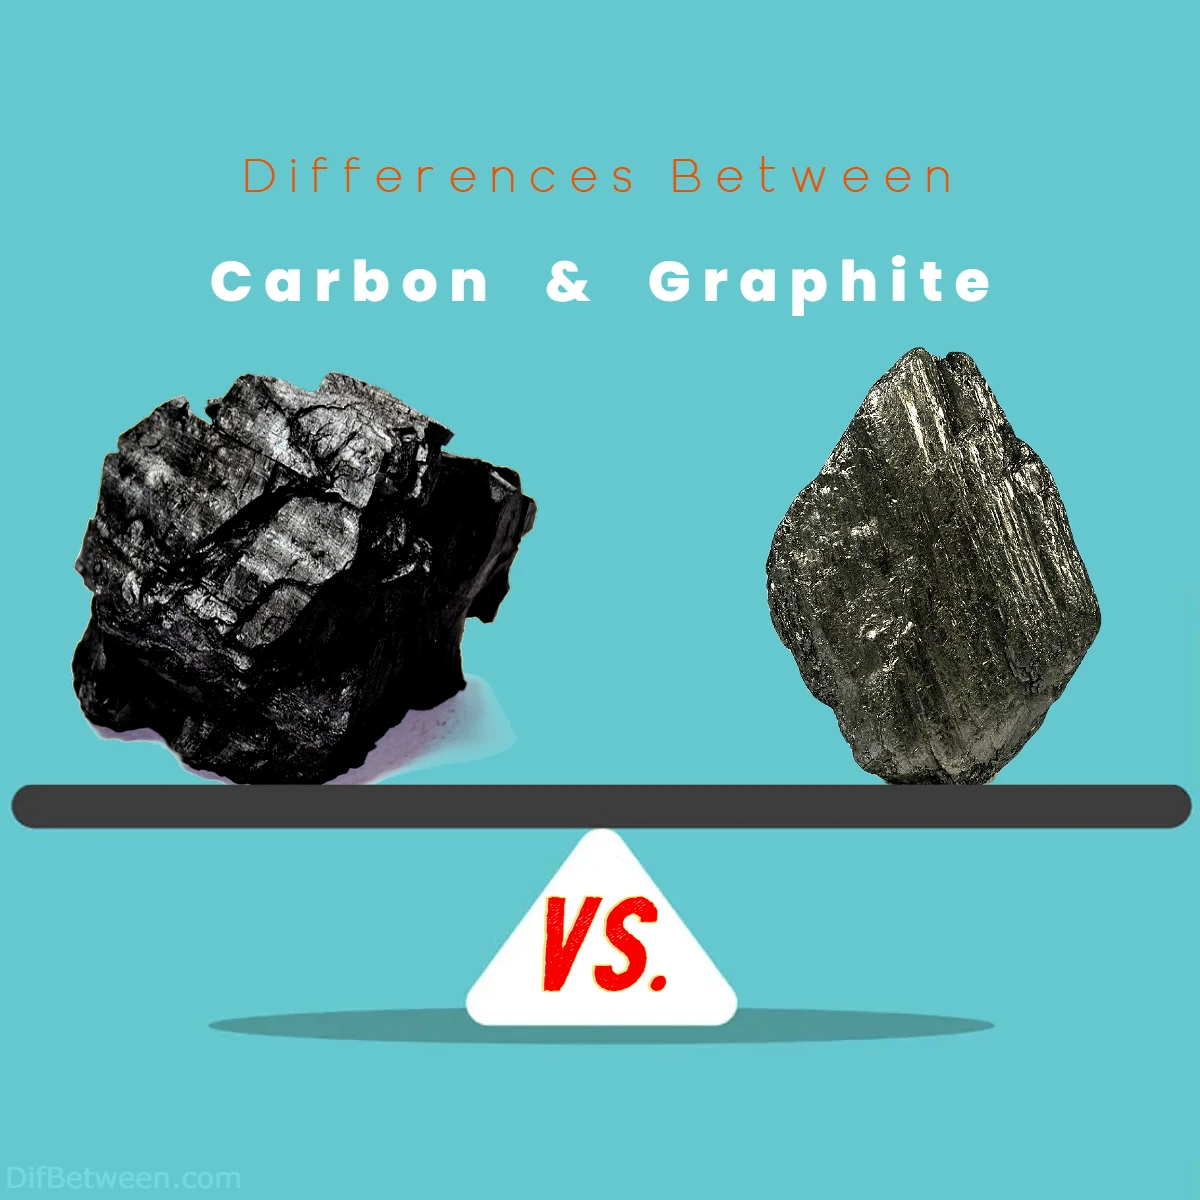 Differences Between Carbon vs Graphite